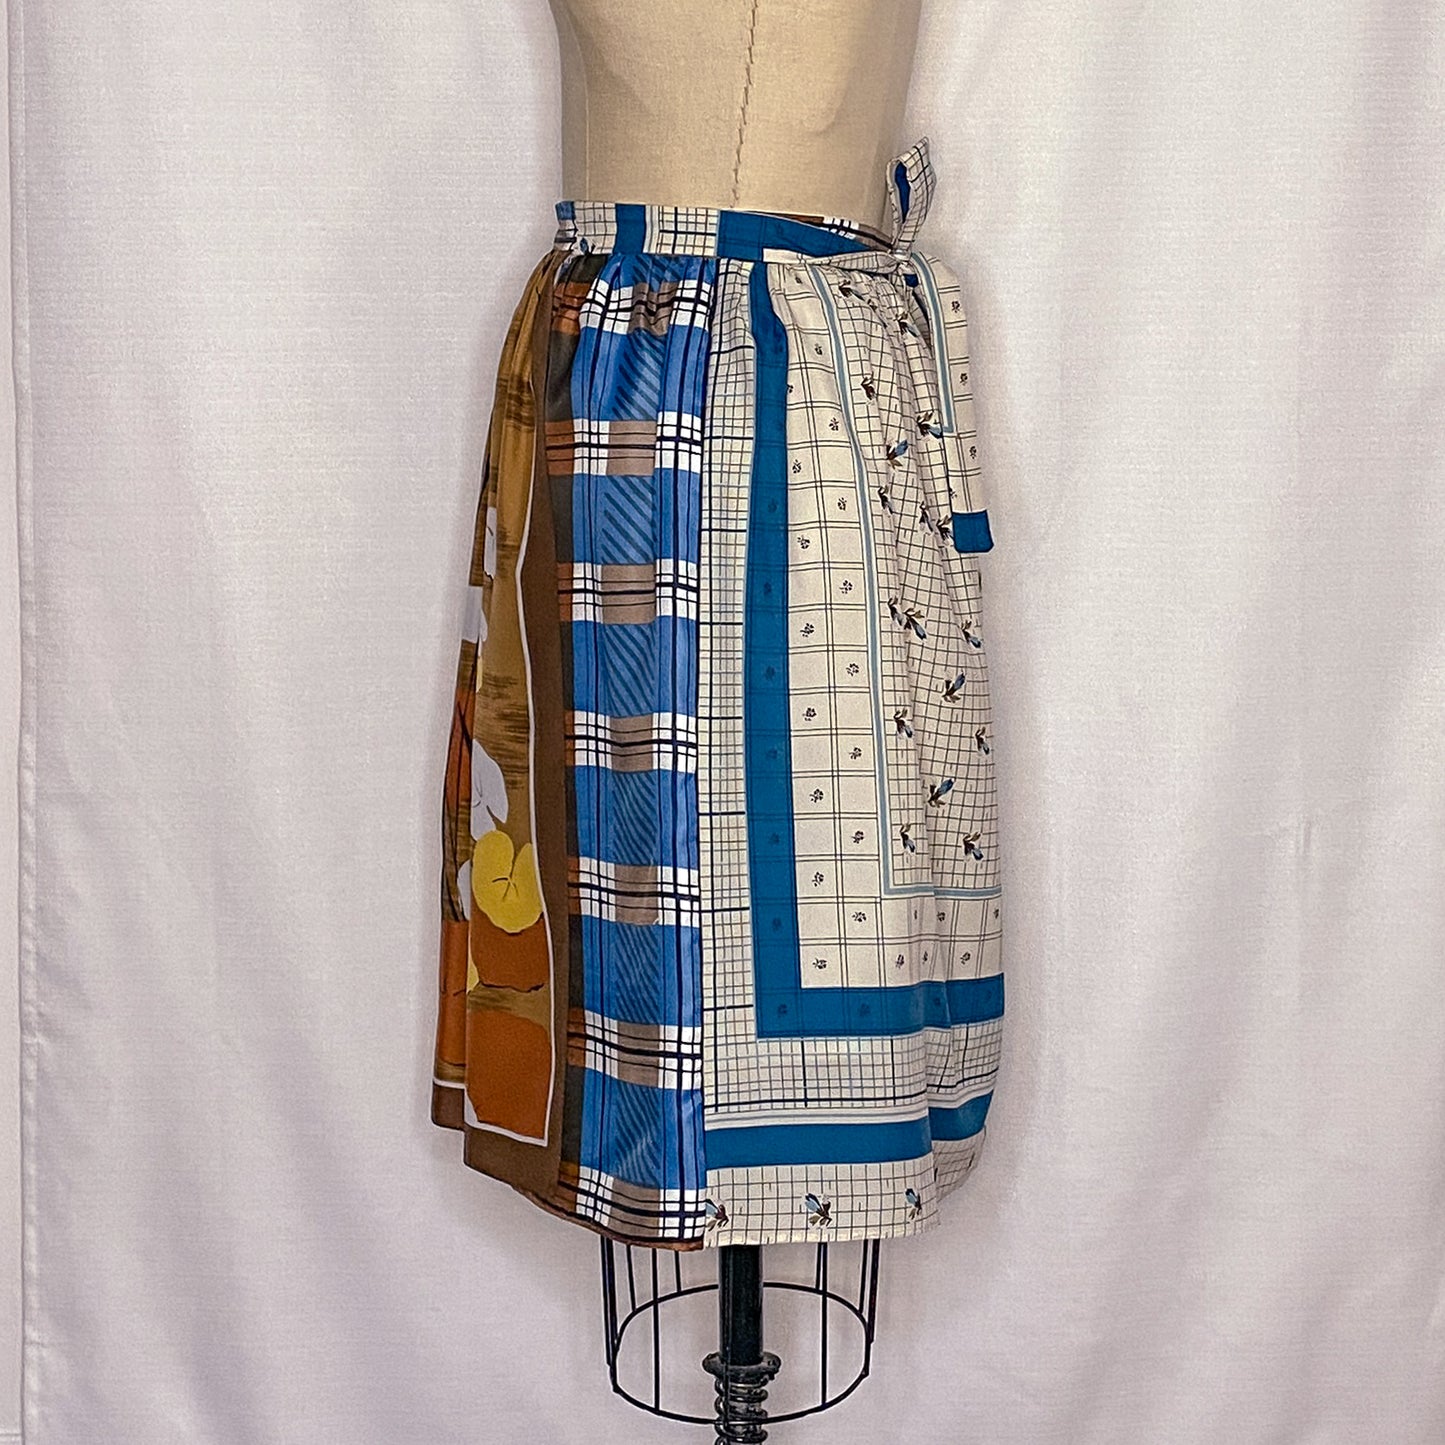 Ellie Wrap Skirt # 17 - Size Small - One-of-a-Kind